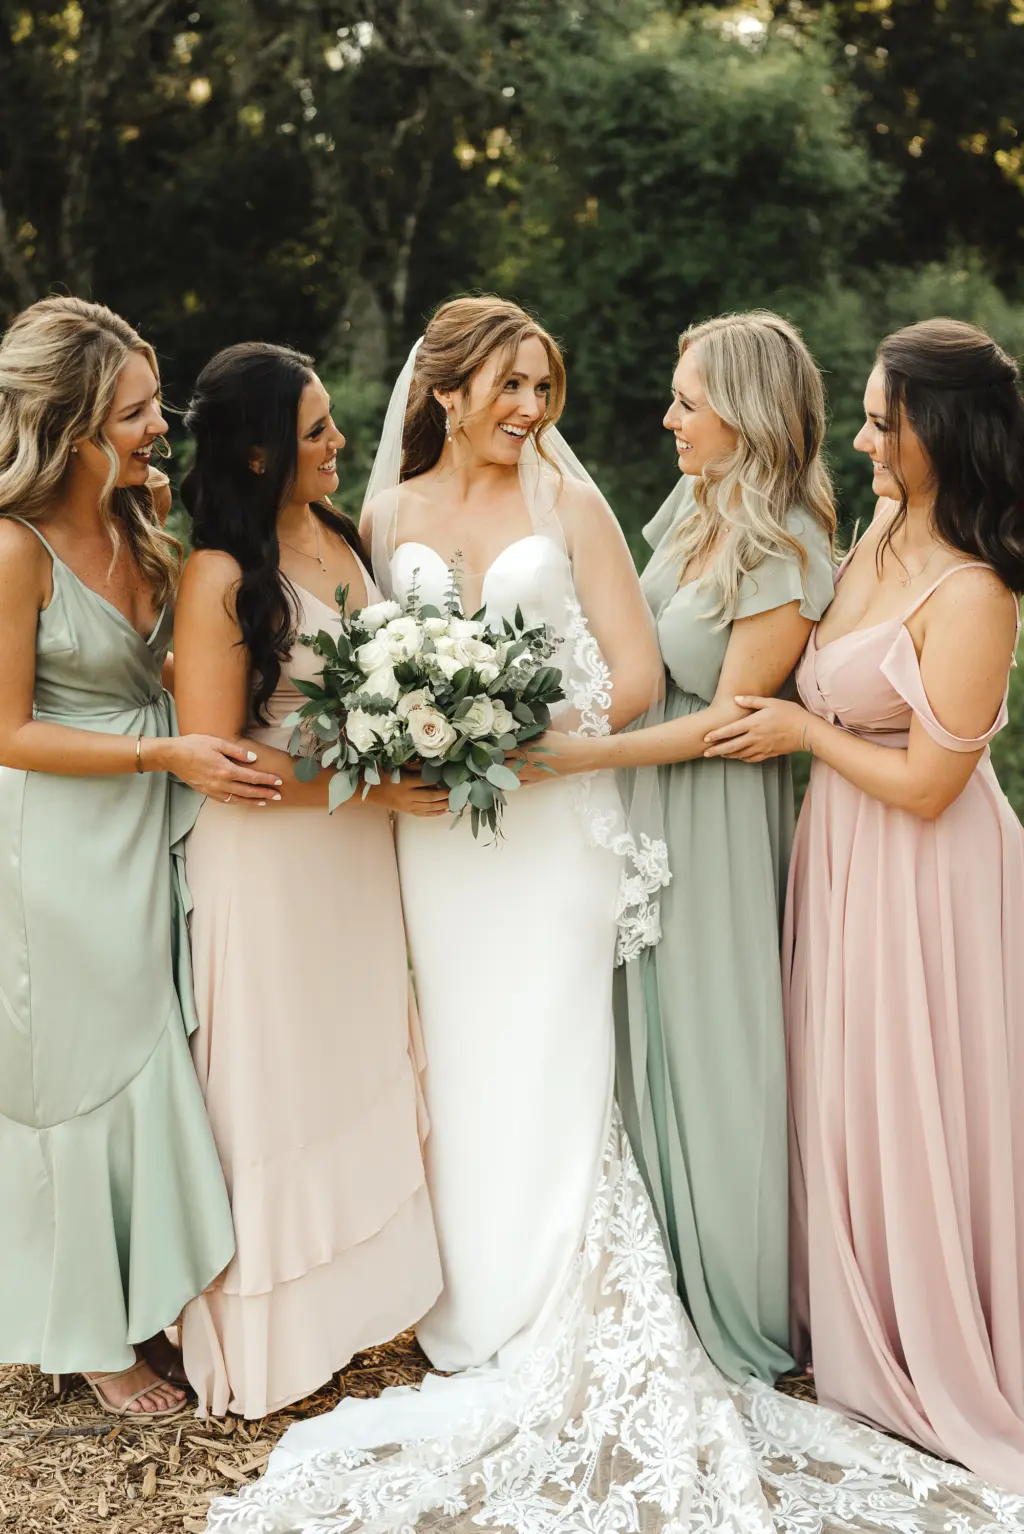 Bride with Bridesmaids Wedding Portrait | Blush Pink and Sage Green Dress Ideas | Tampa Bay Florist Monarch Events and Design